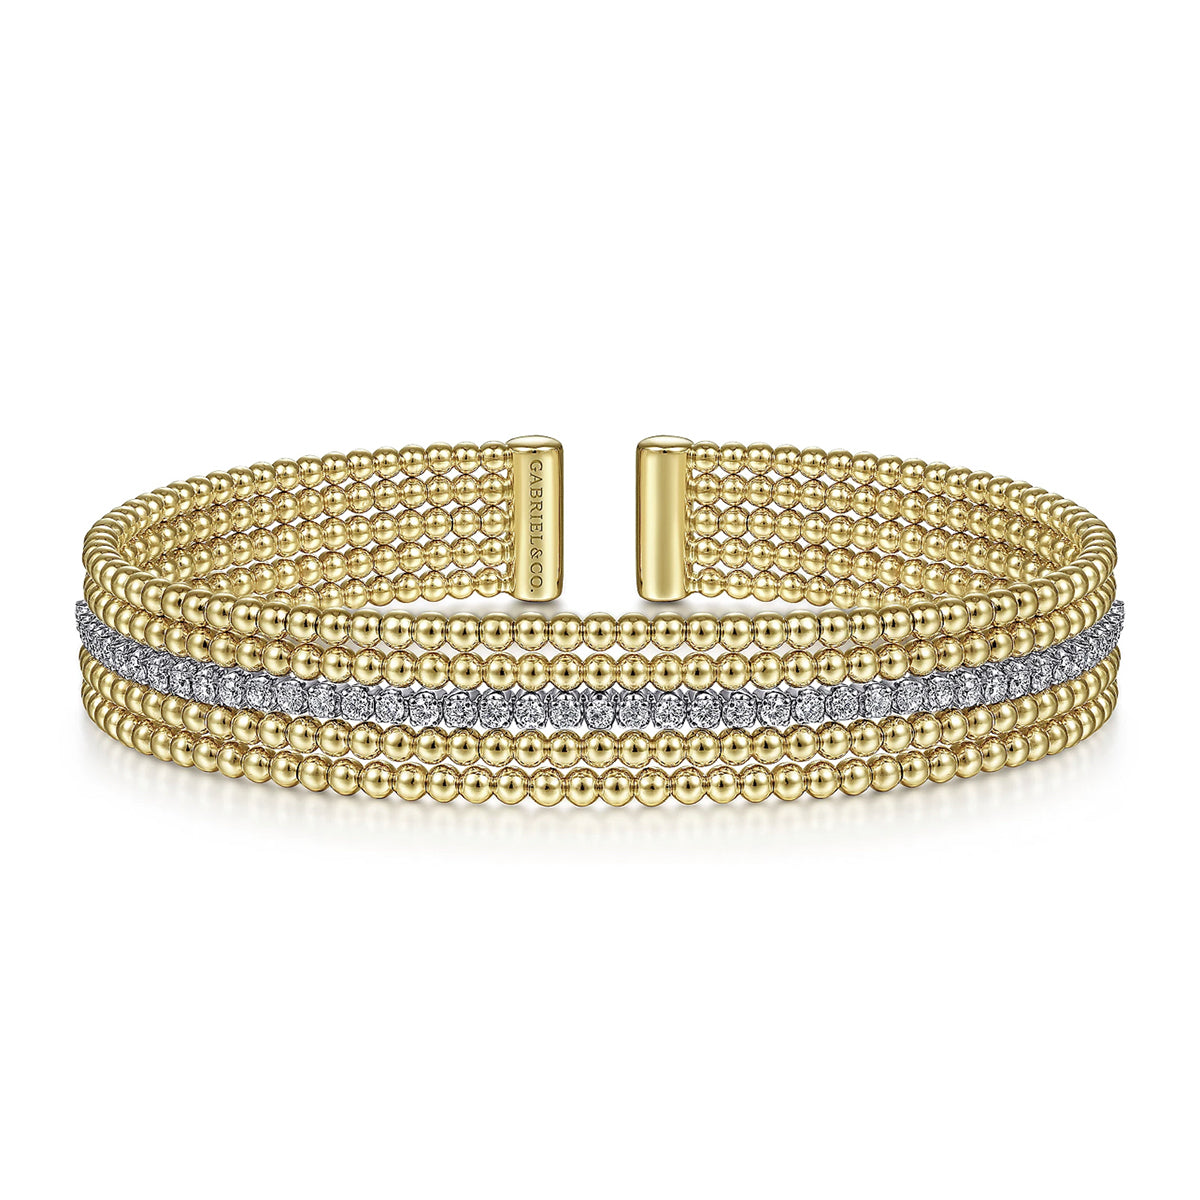 Gabriel & Co. -14K White-Yellow Gold Bujukan Cuff Bracelet with Butter Cup Setting in size 6 5  BG4449-65M45JJ